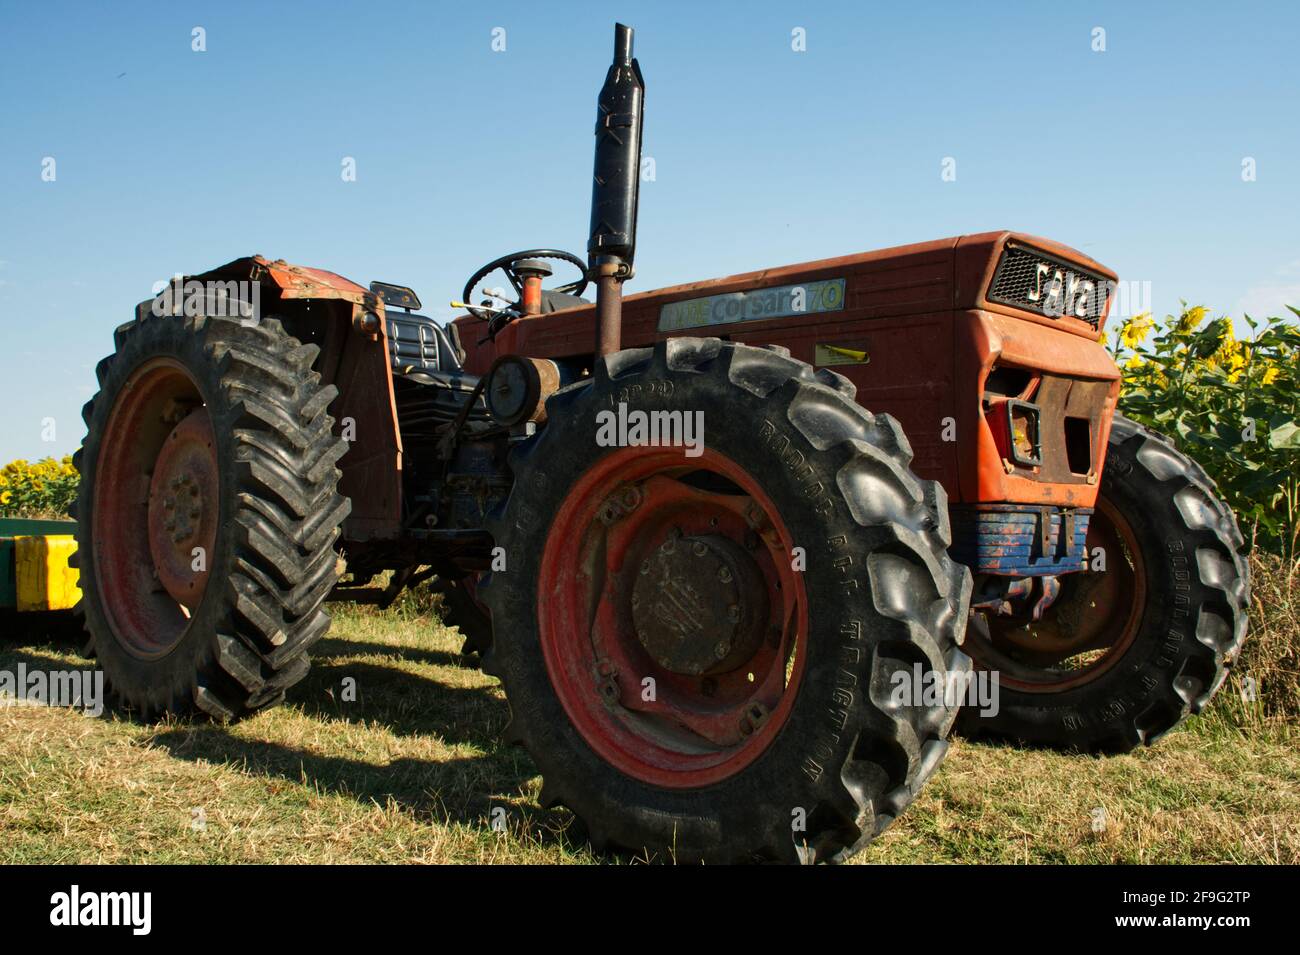 SAME tractor, open style with no cab. Old and knocked about with broken  lights Stock Photo - Alamy